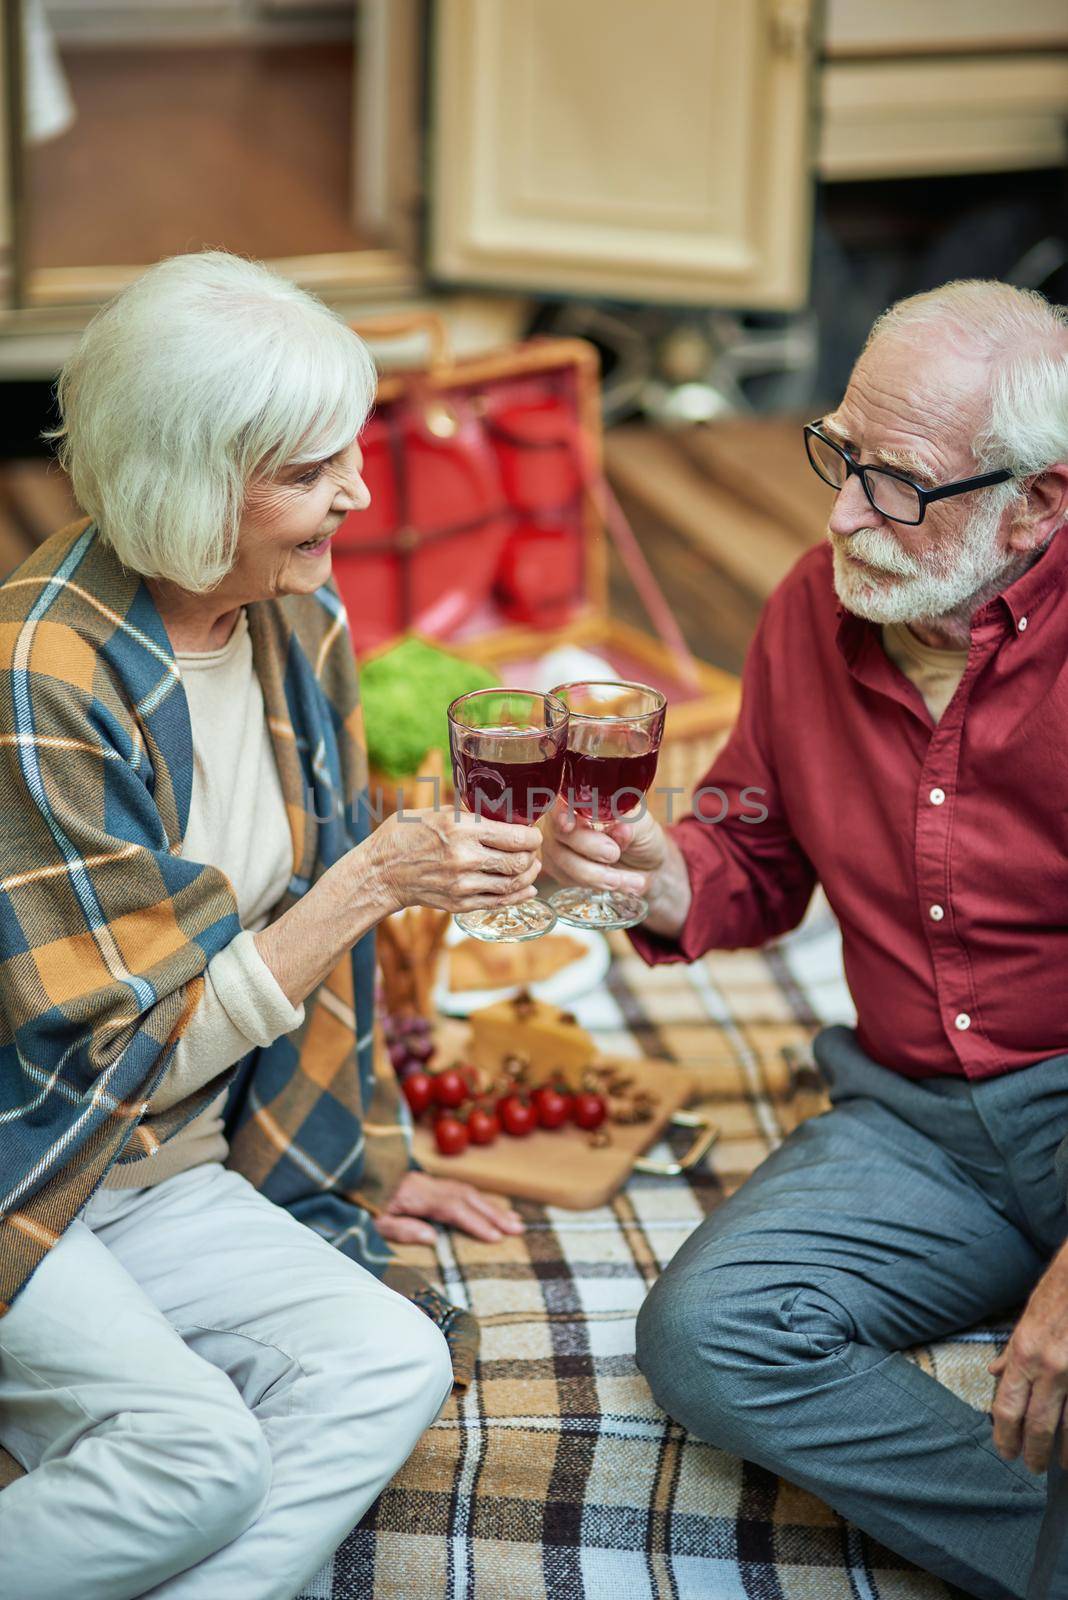 Smiling elderly couple enjoying the trip and celebrating with wine by friendsstock